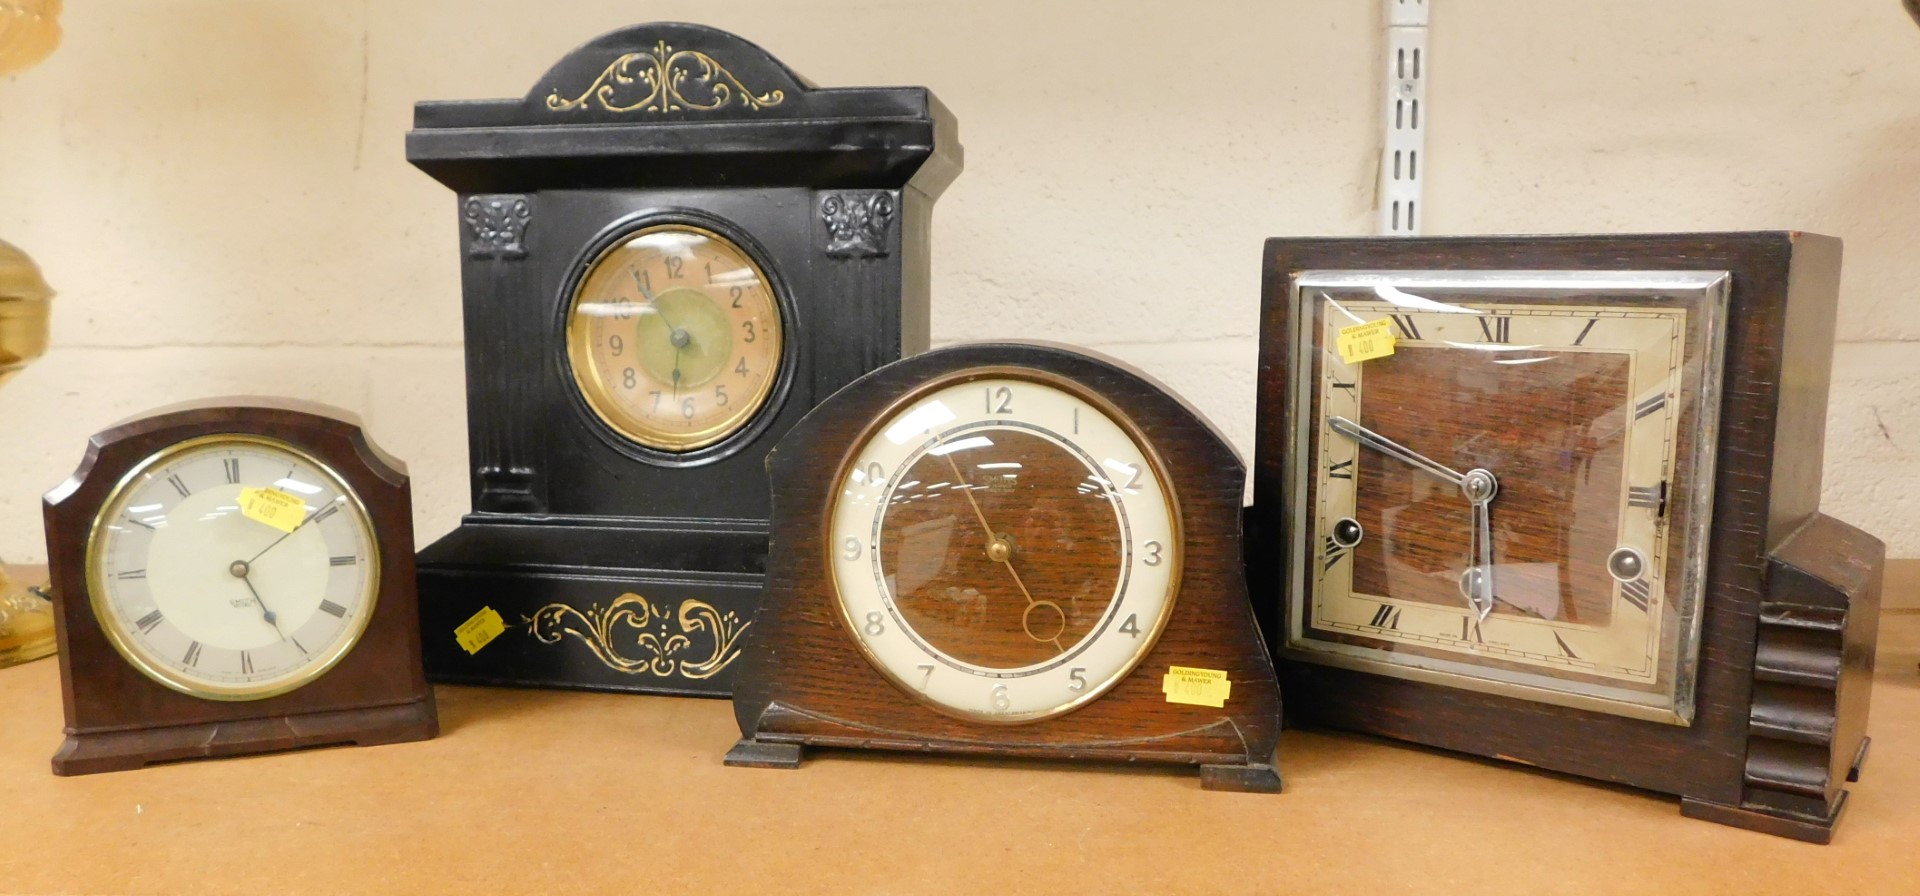 Four mantel clocks, one a Smiths eight day mantel clock, in an oak case, one a Bakelite cased Smiths